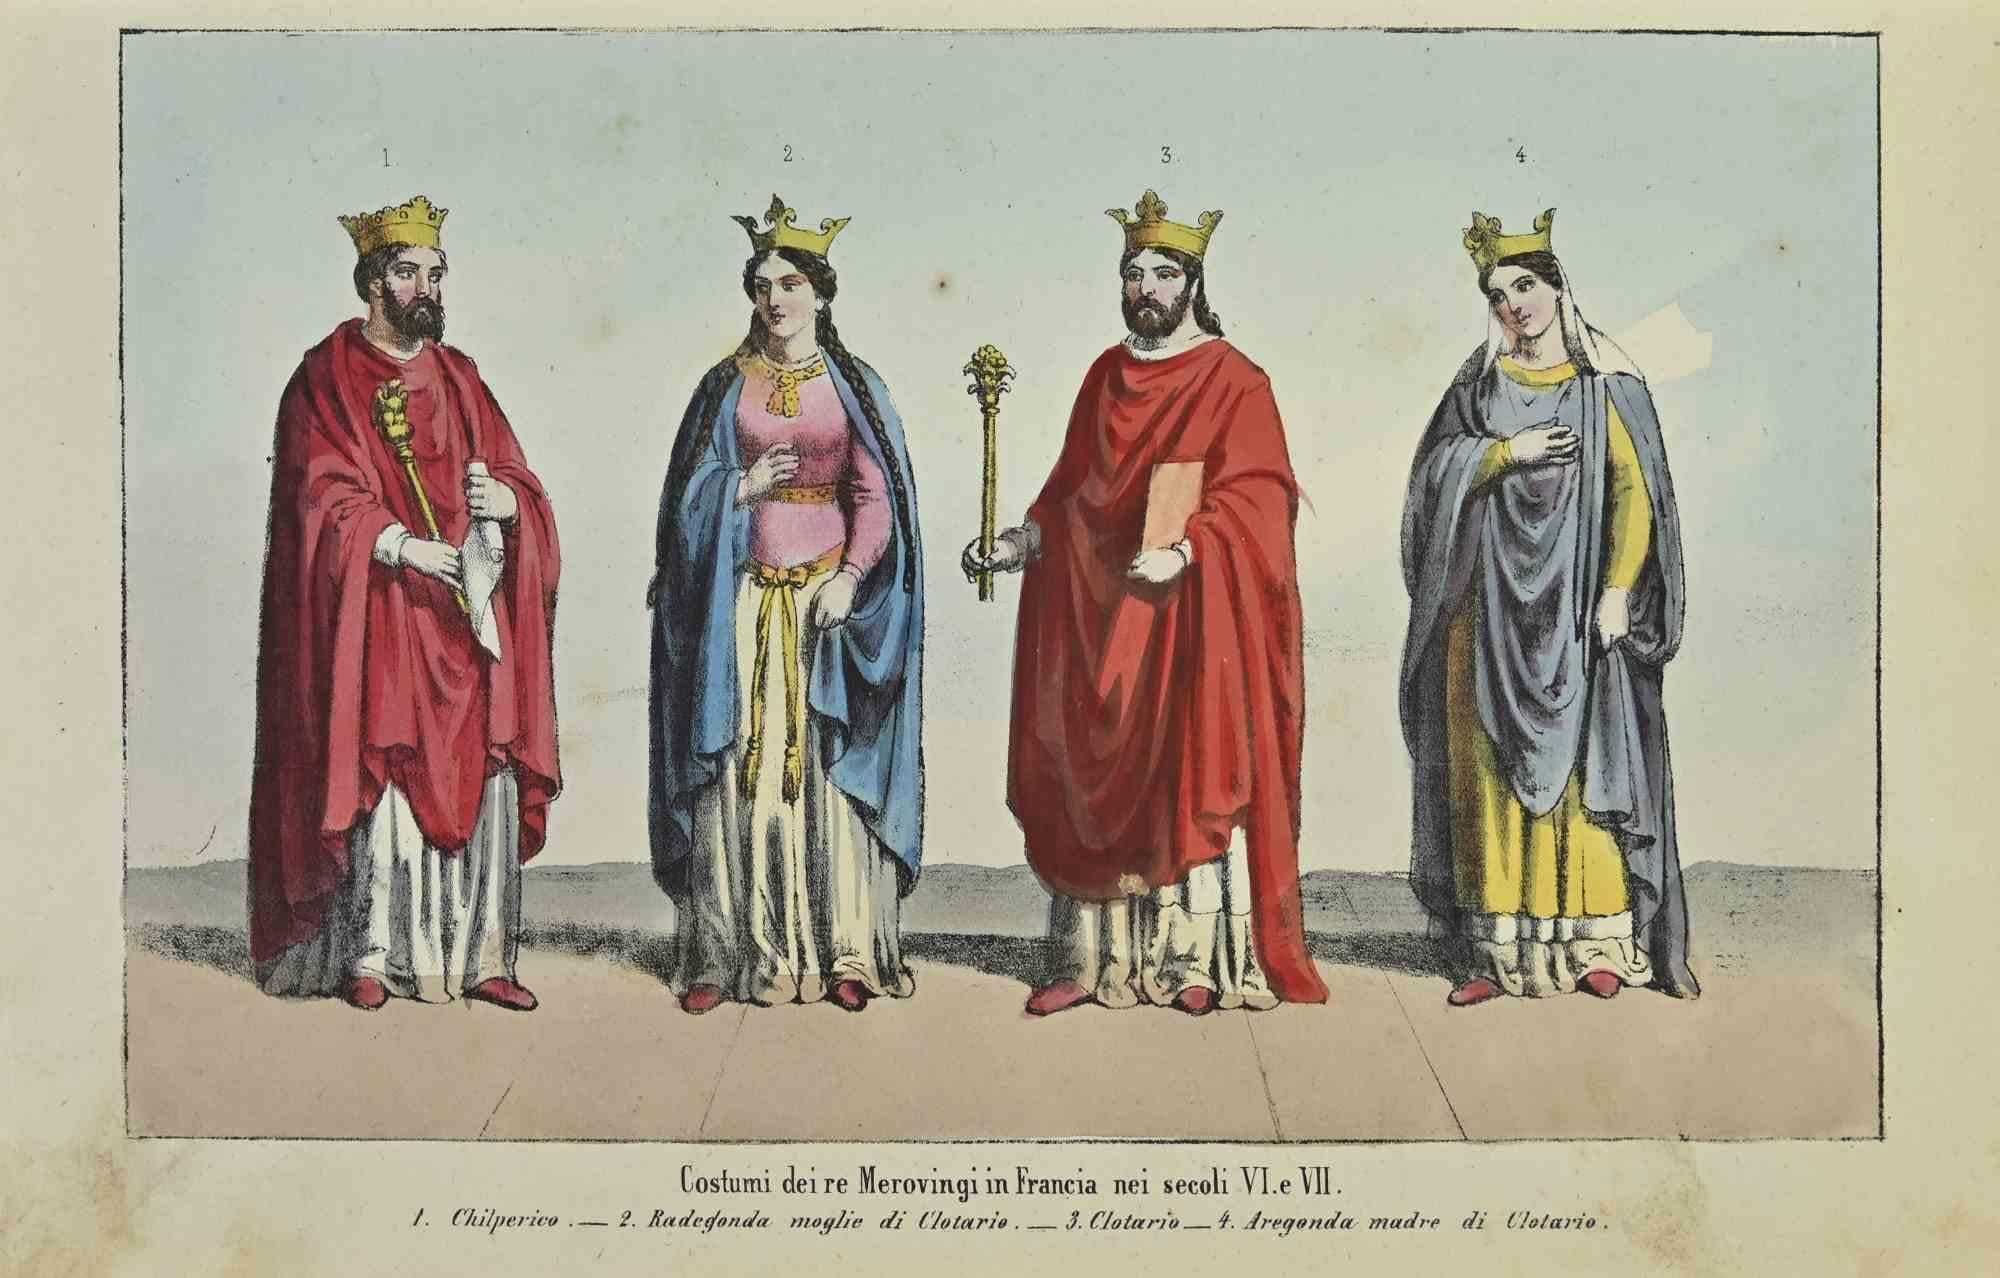 Customs of the Merovingian kings in France in the 6th and 7th centuries is a lithograph made by Auguste Wahlen in 1844.

Hand colored.

Good condition.

At the center of the artwork is the original title "Costumi dei re Merovingi in Francia nei